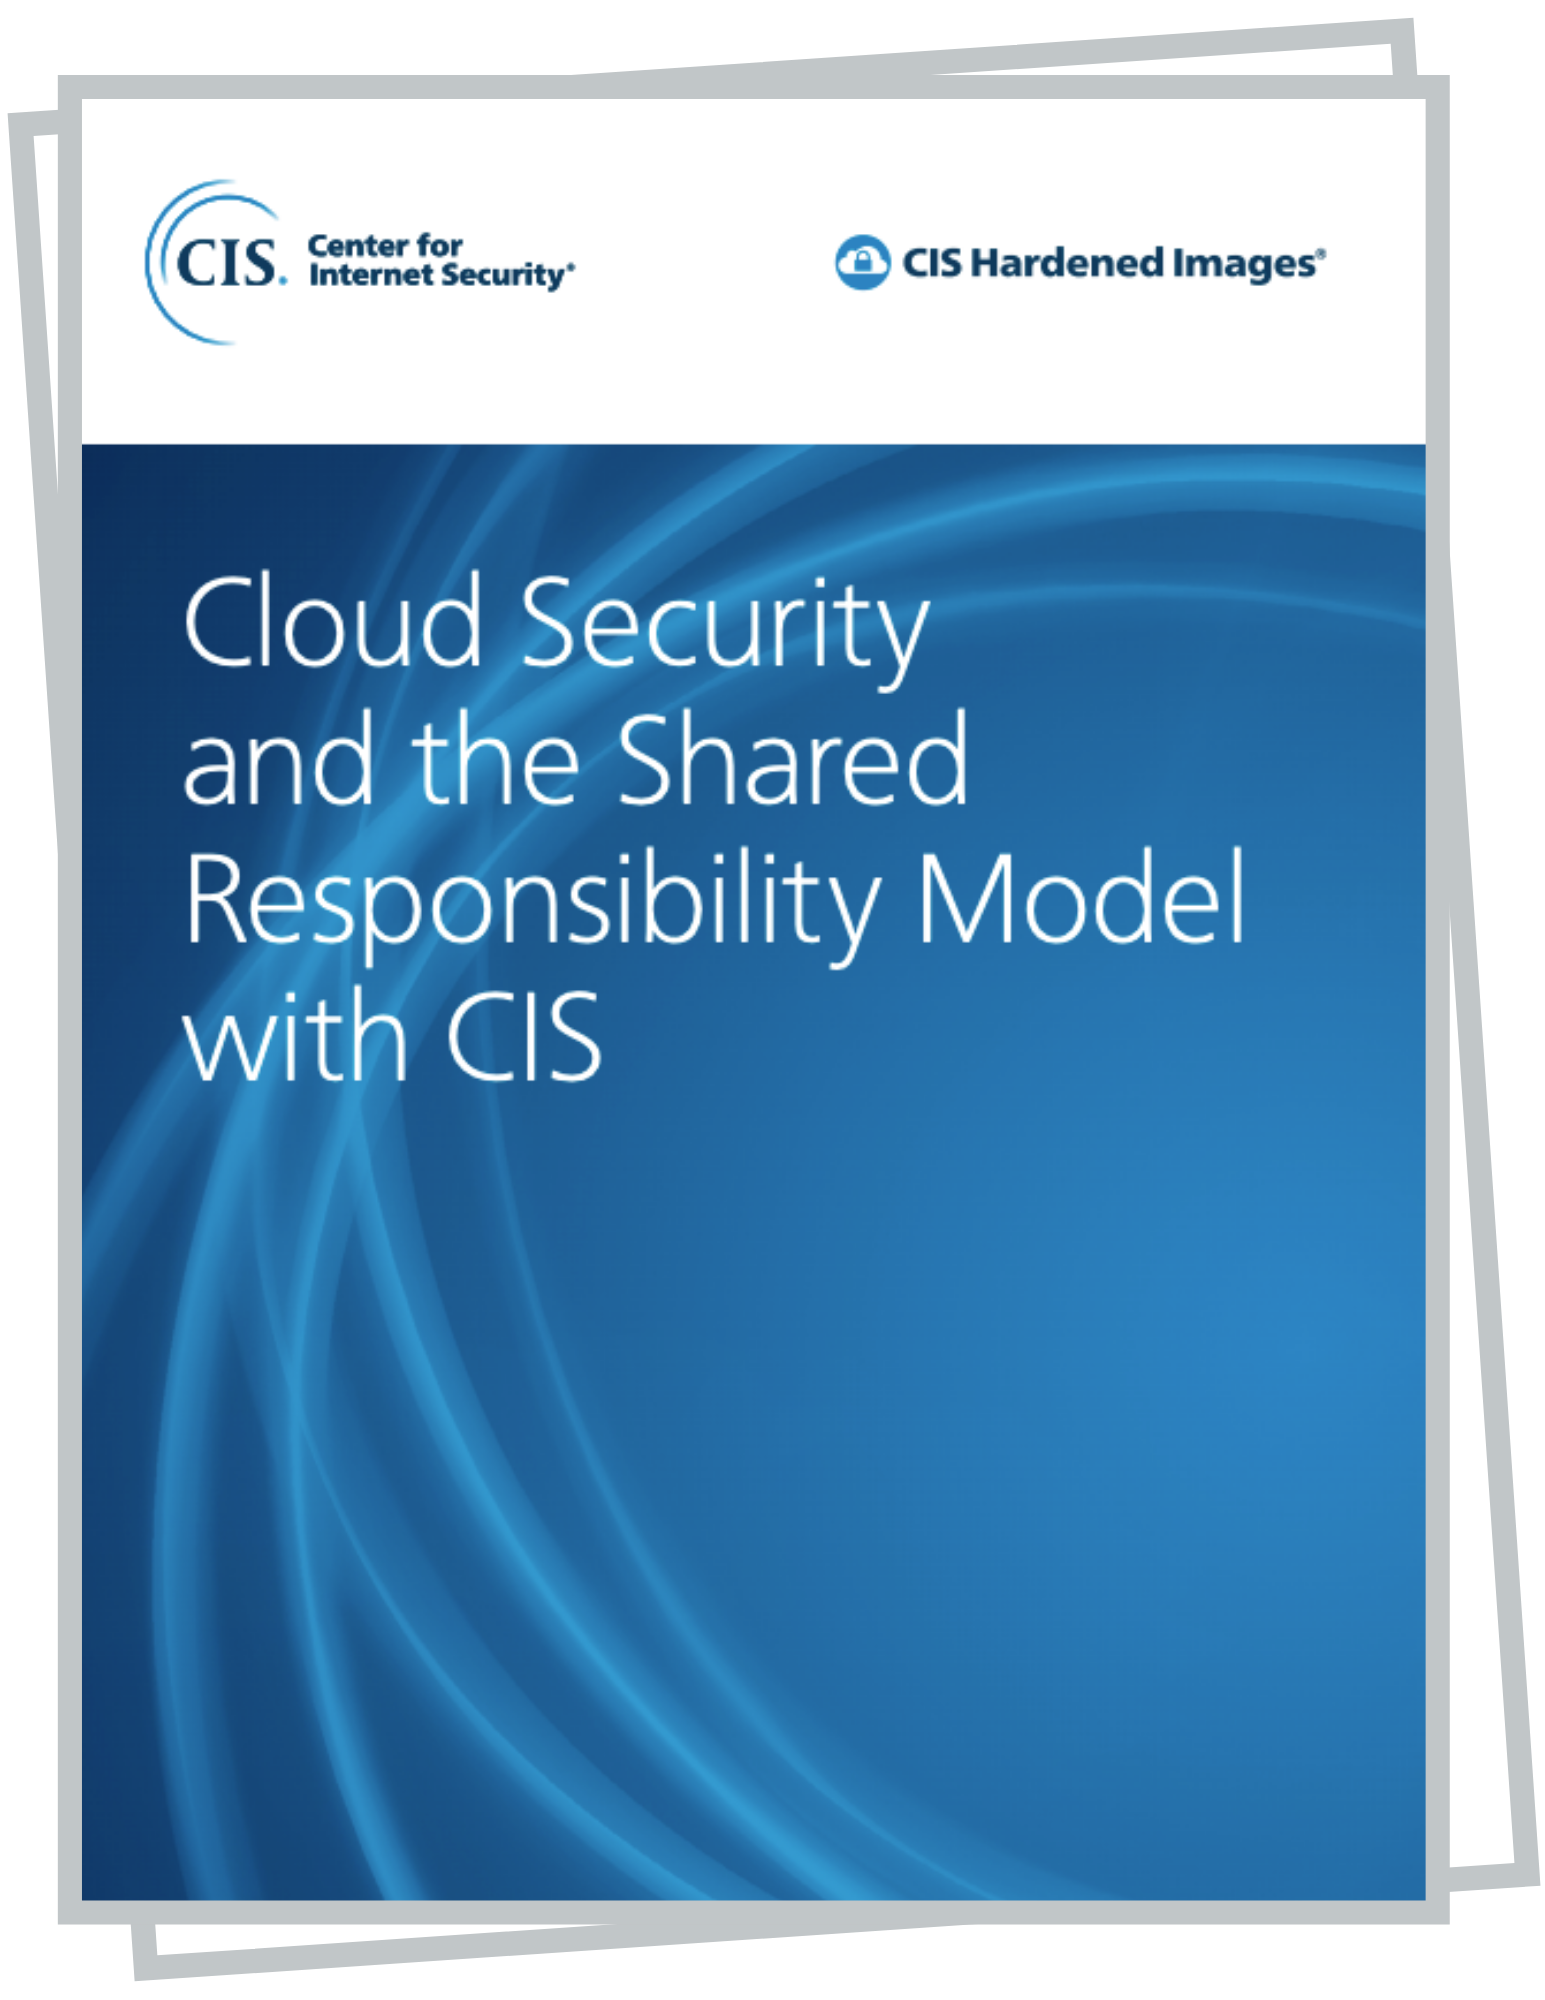 Cloud-security-shared-responsibility-model-white-paper-center-for-internet-security